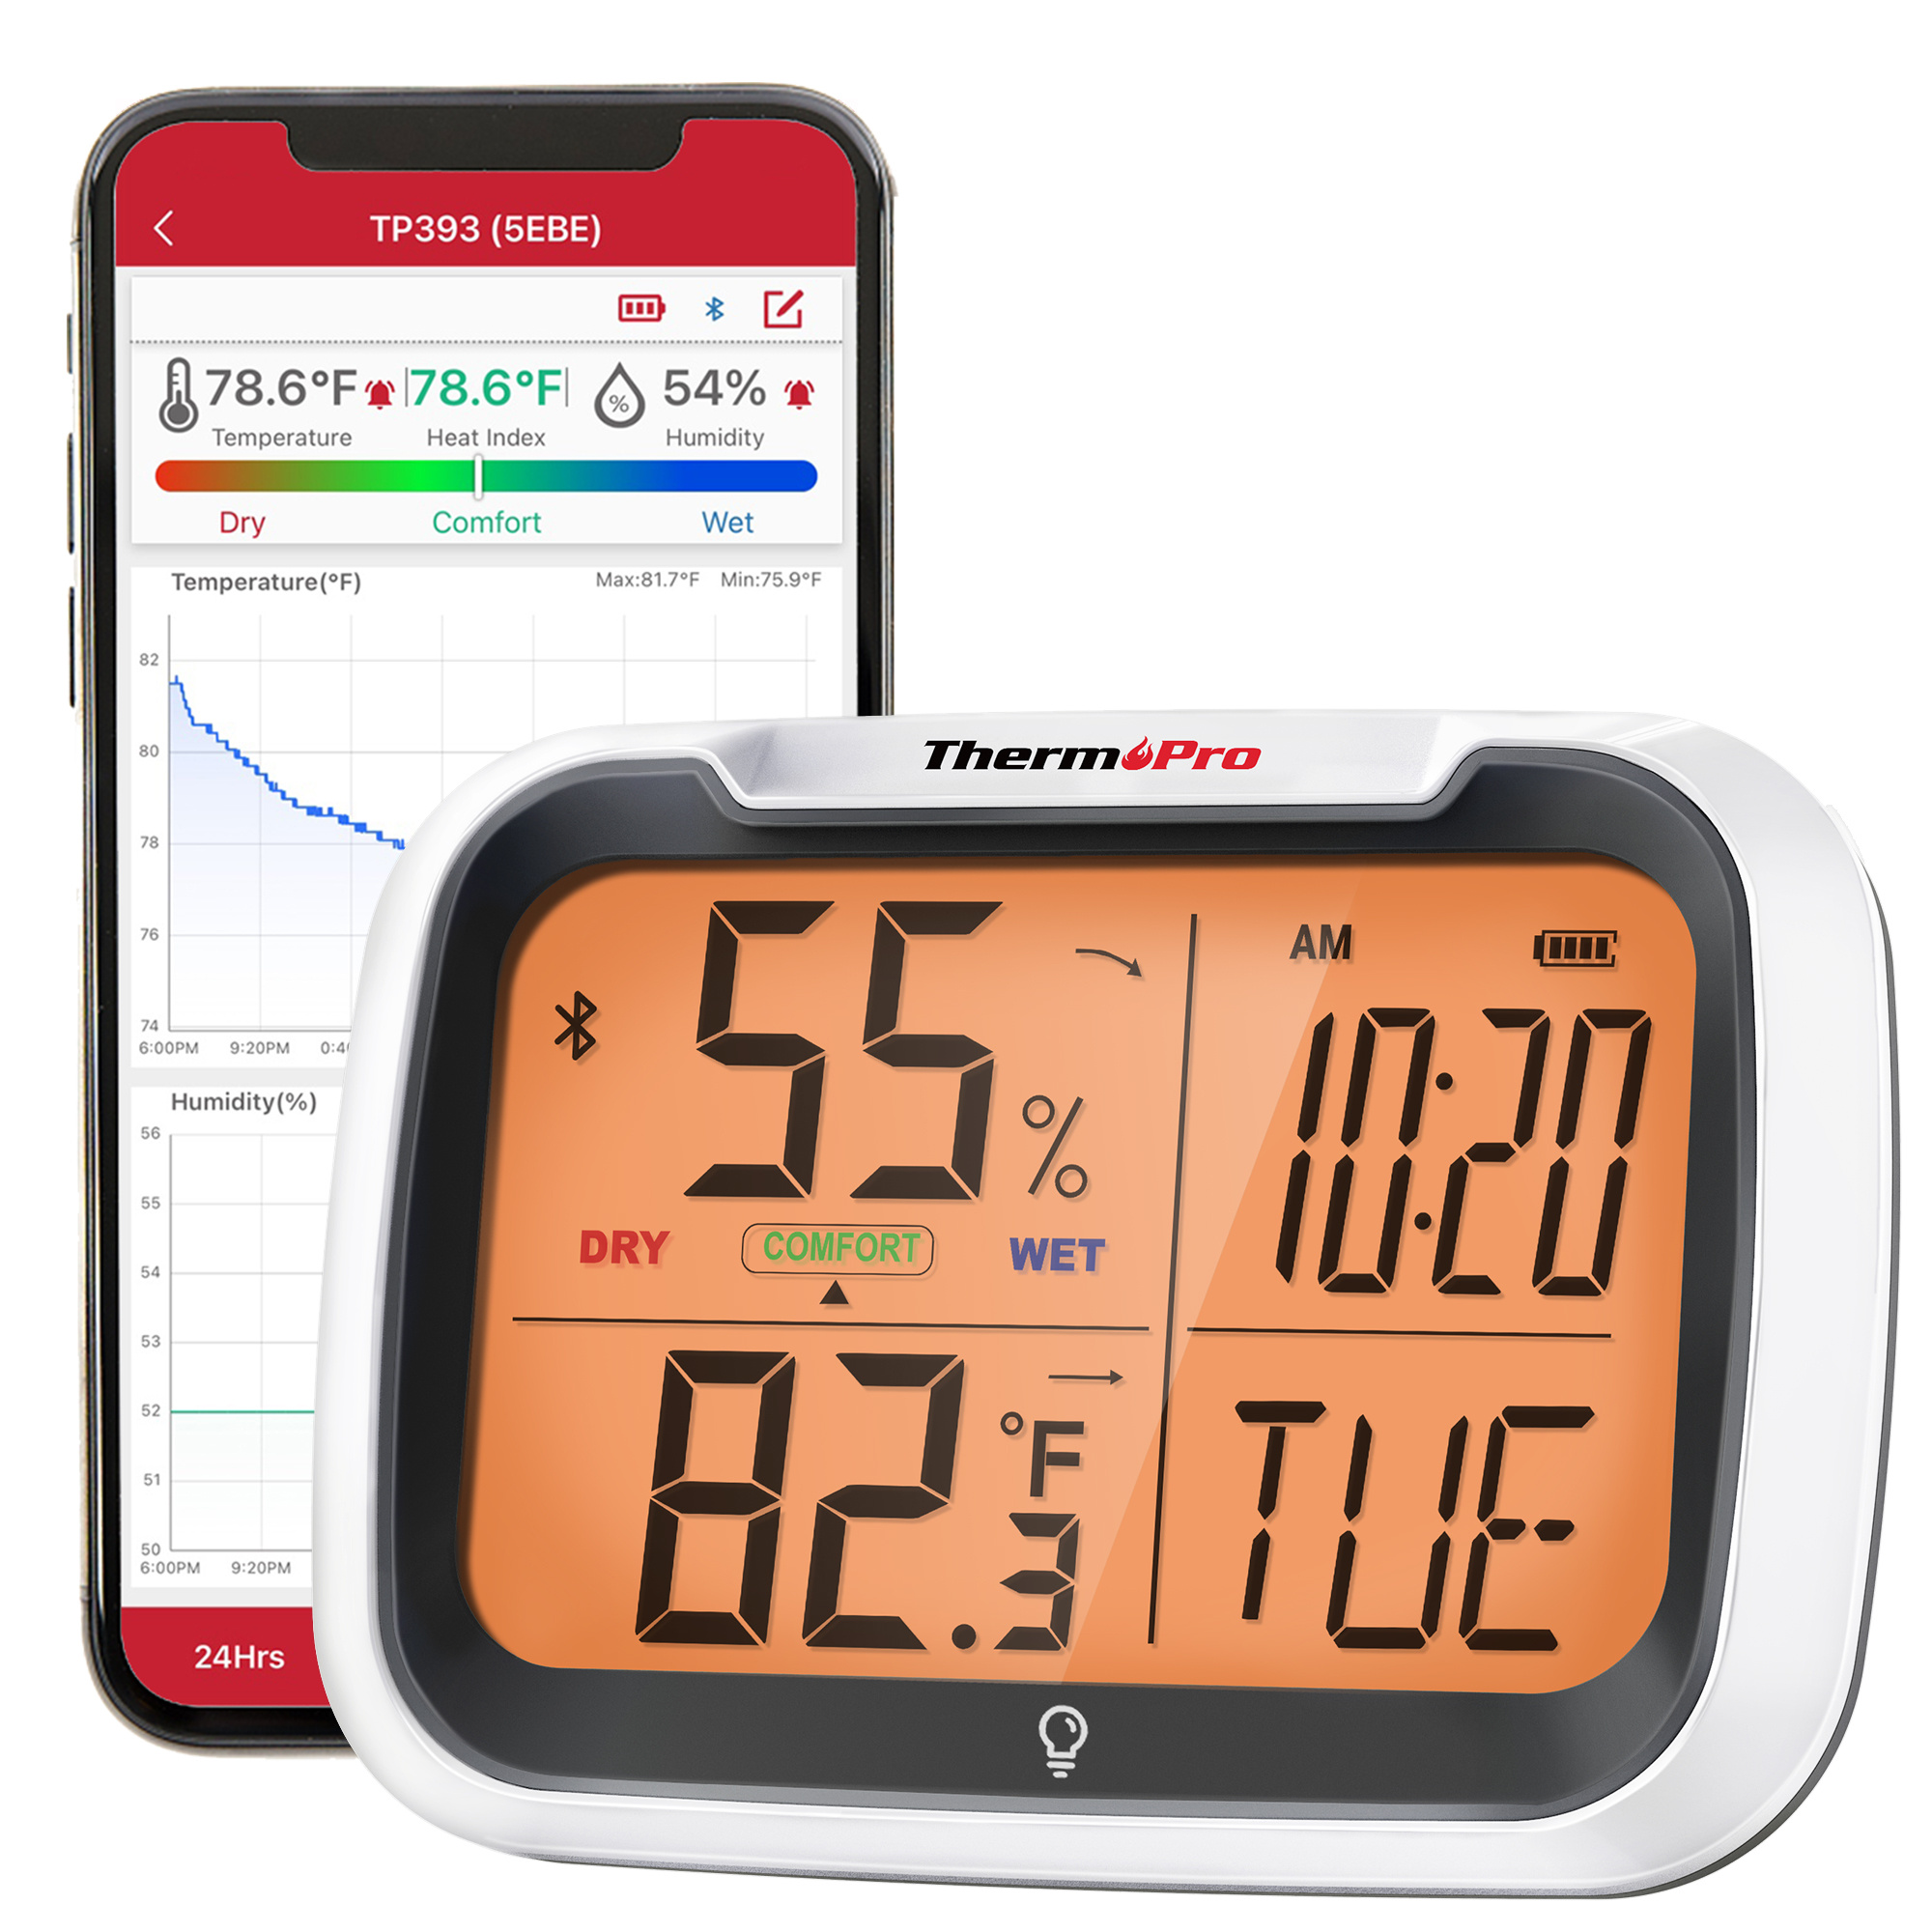 ThermoPro TP152 Hygrometer Room Thermometer, Desktop Digital Room  Thermometer With Temperature And Humidity Monitor, Accurate Hygrometer Room  Thermome